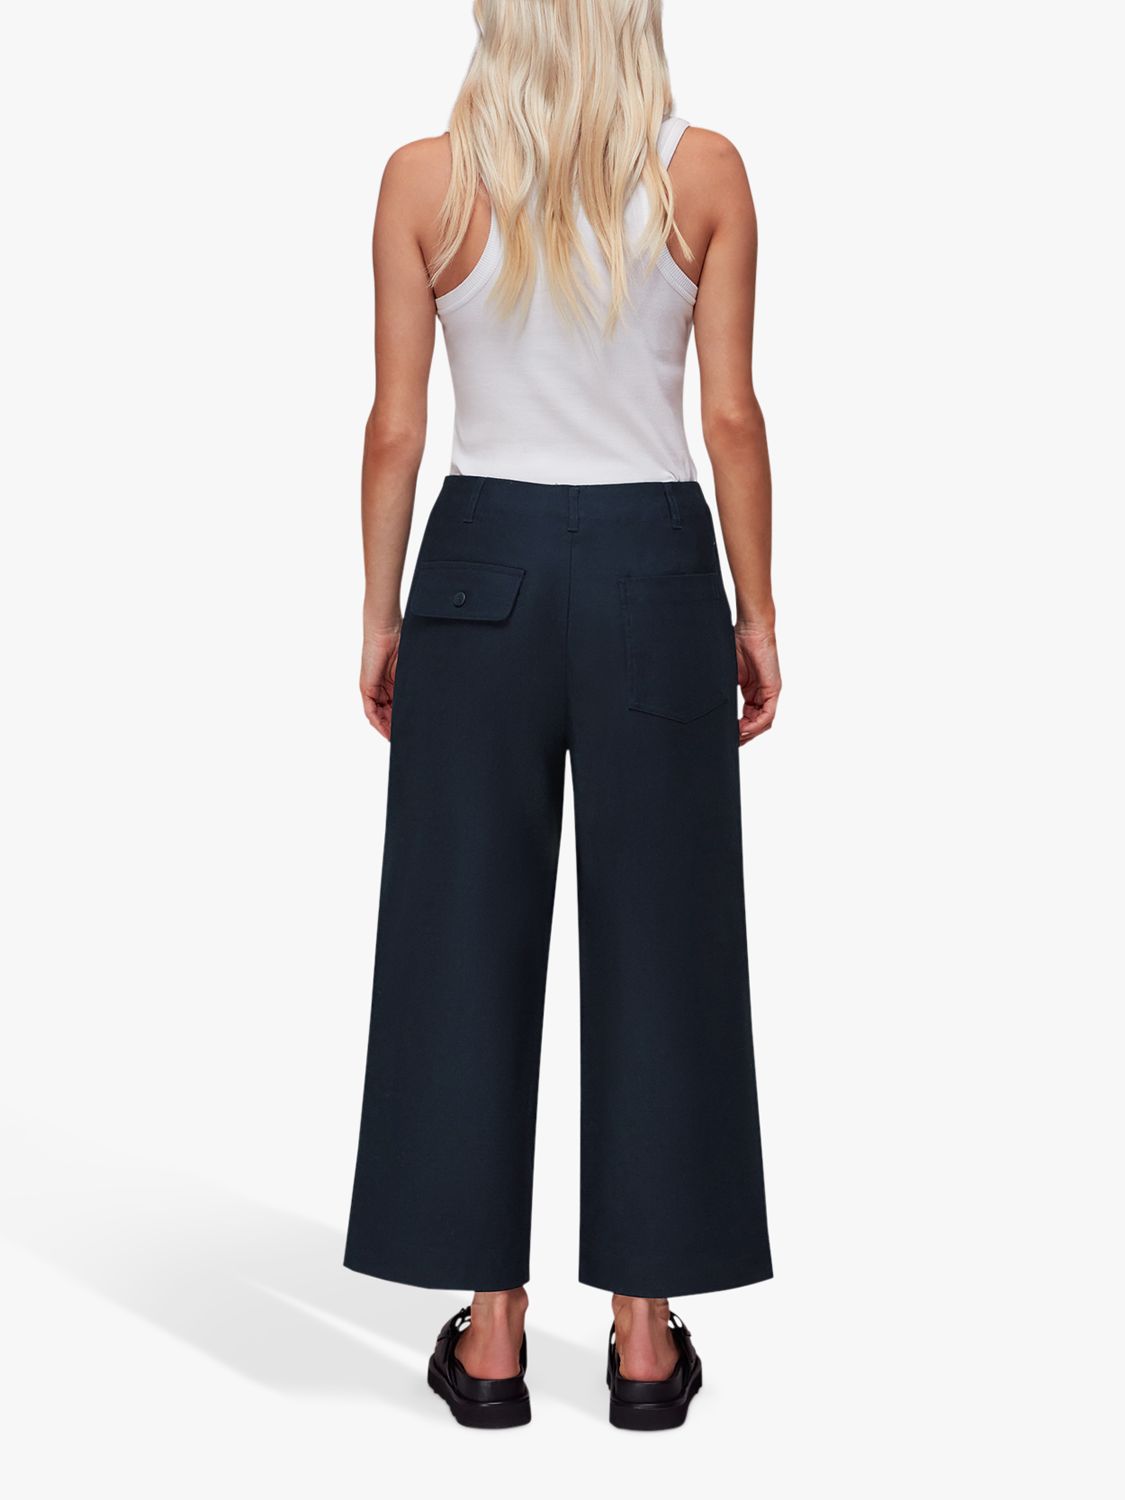 Whistles Petite Amber Chino Trousers, Navy at John Lewis & Partners